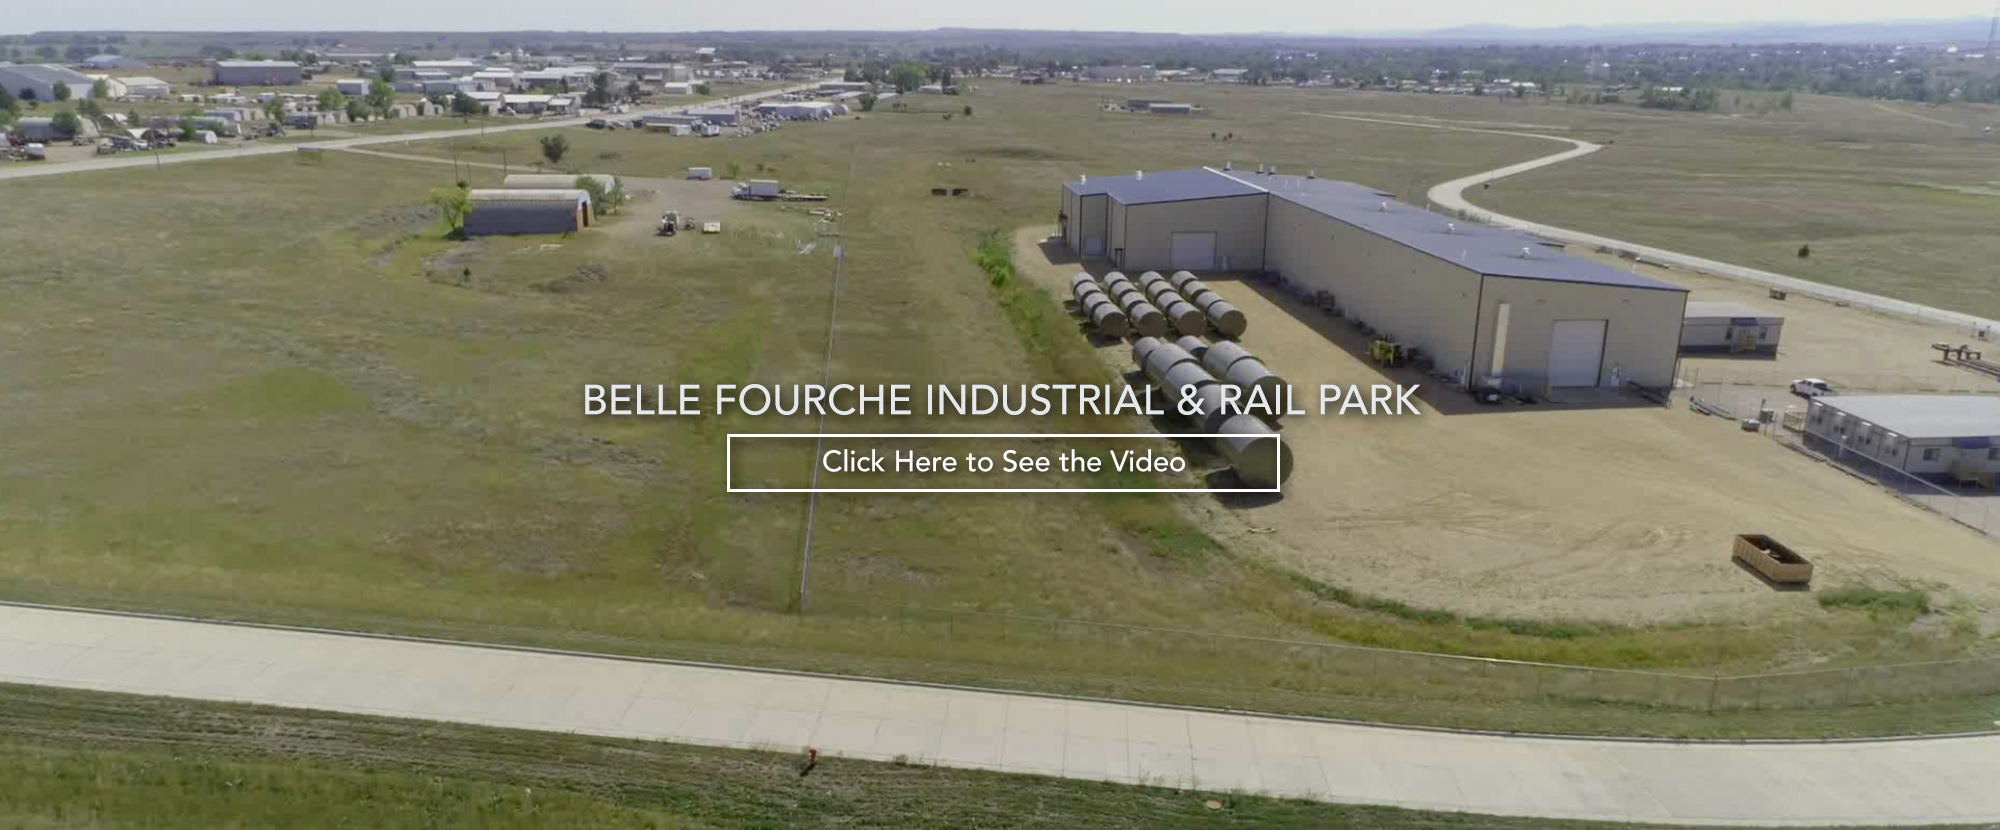 Belle Fourche Industrial & Rail Park. Click Here to See the Video